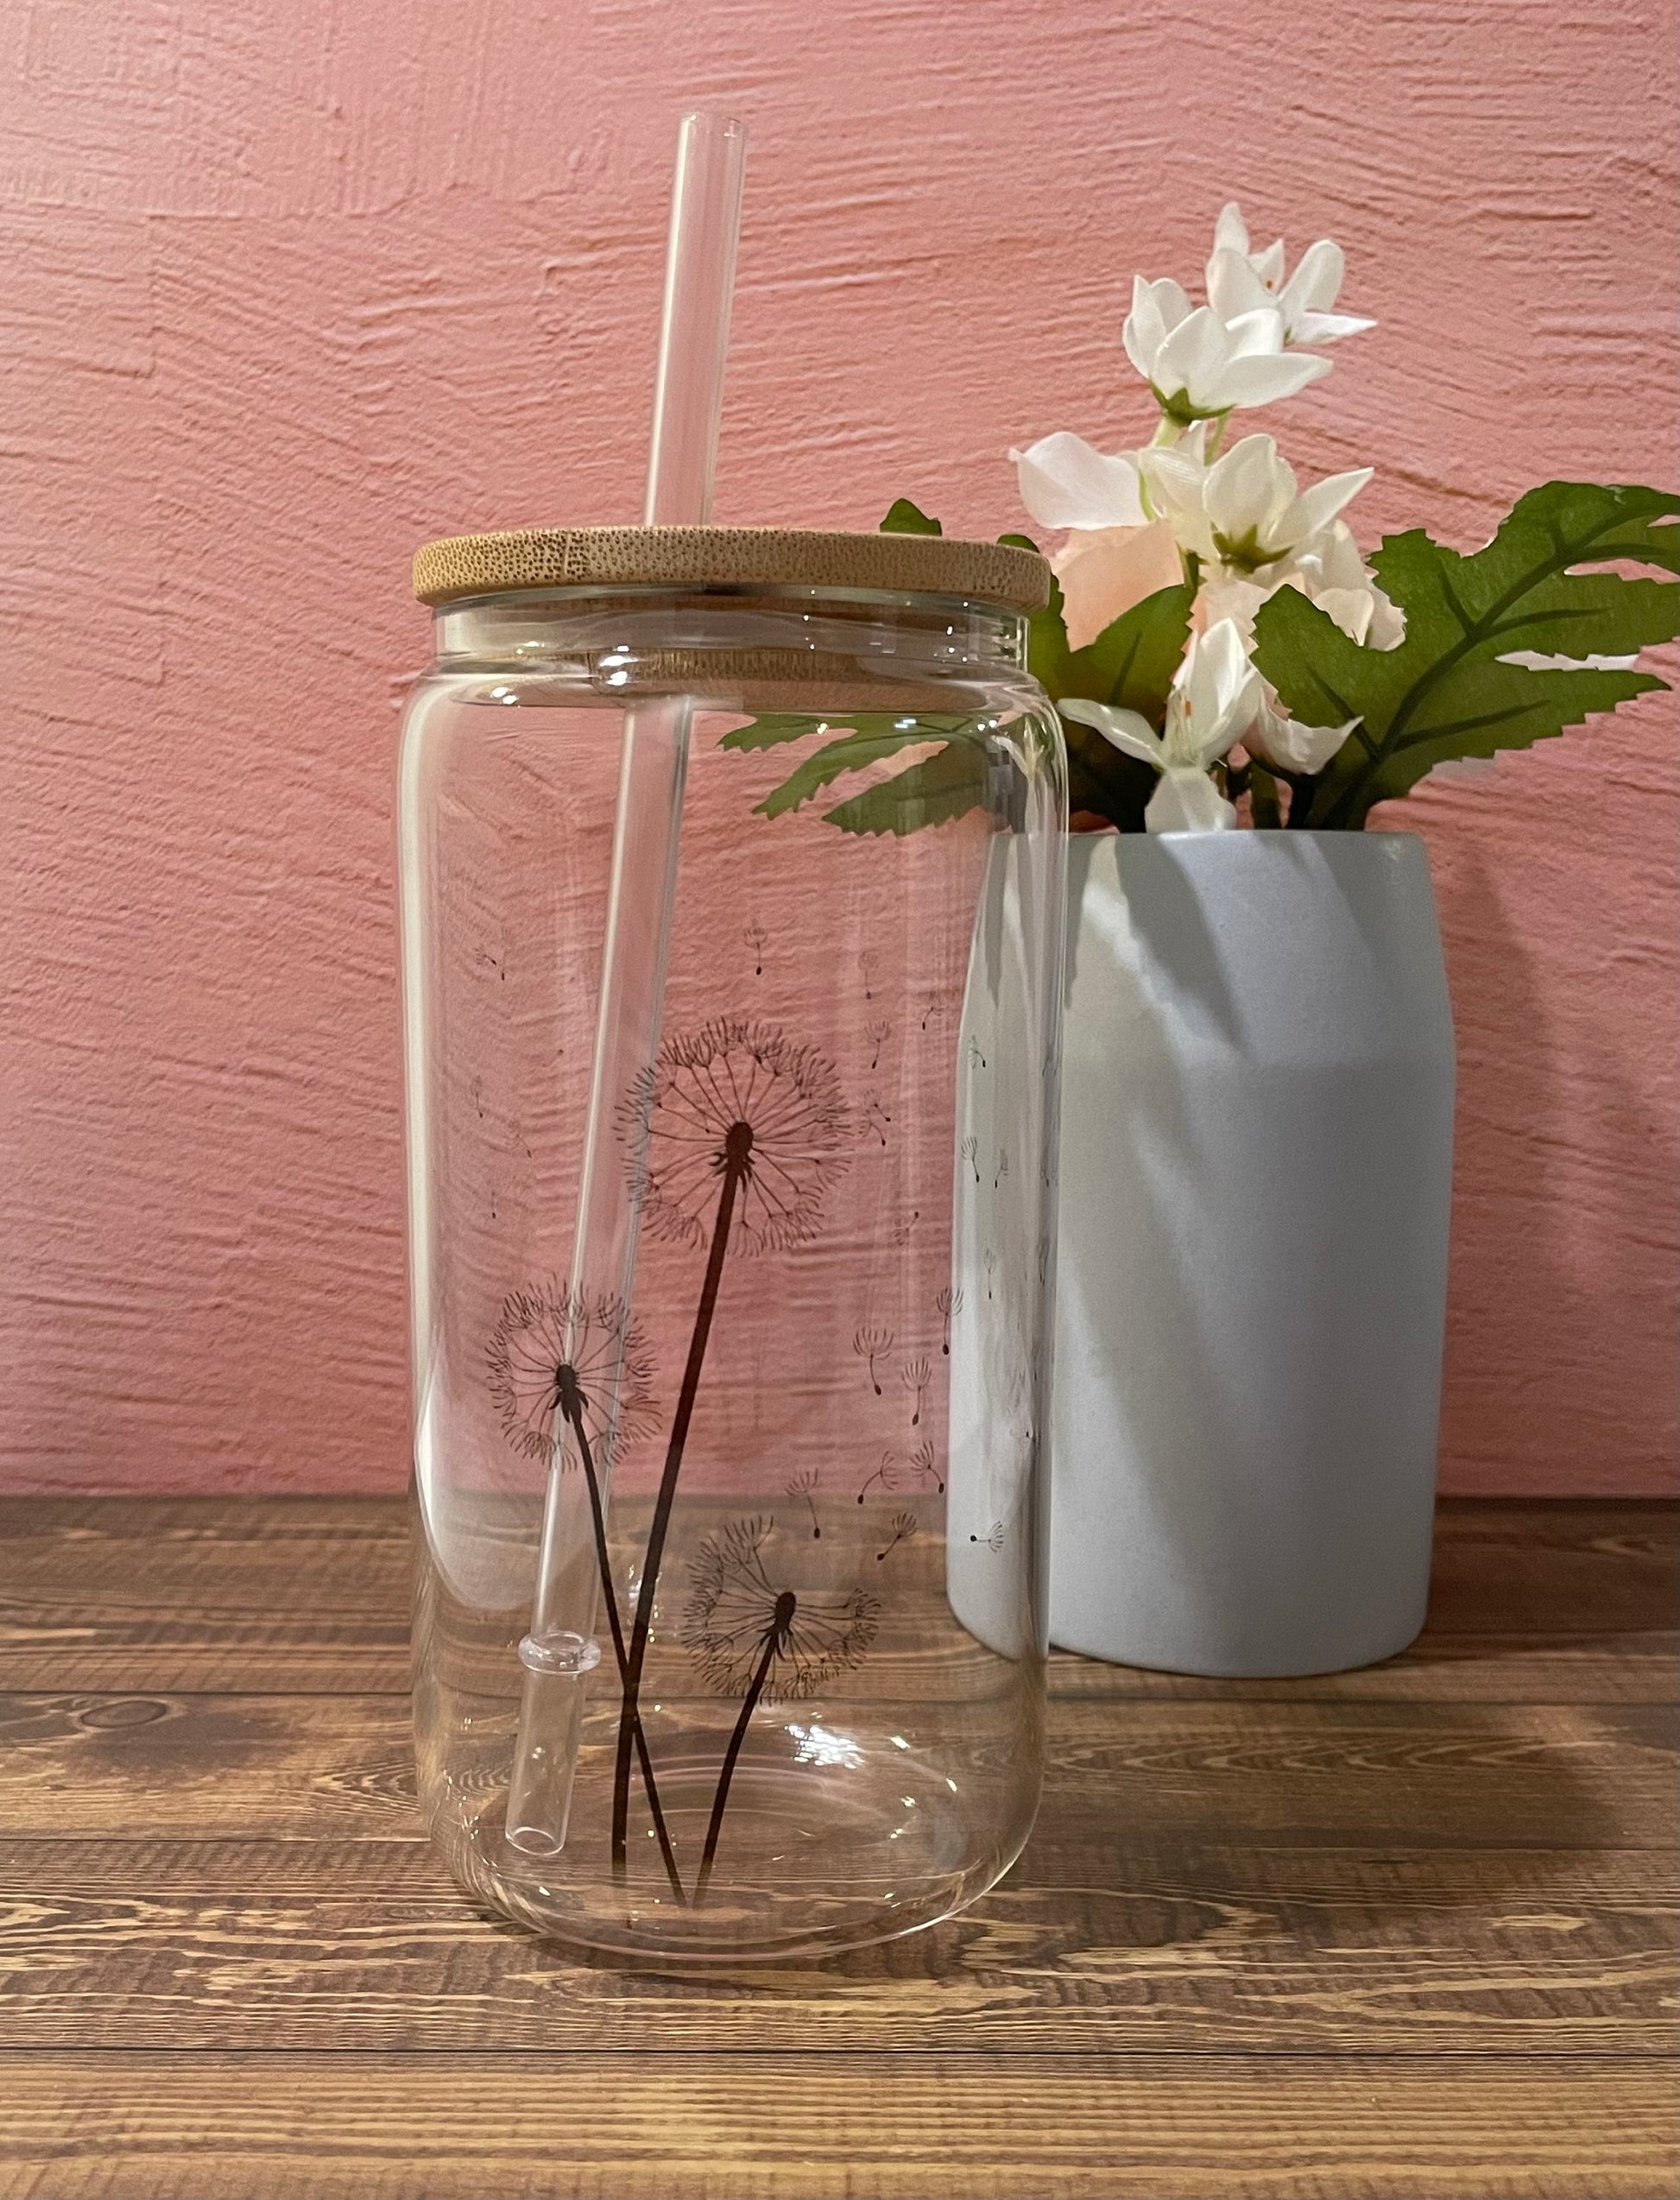 Wildflower Cup Iced Coffee Glass Floral Glass Can With Lid Straw